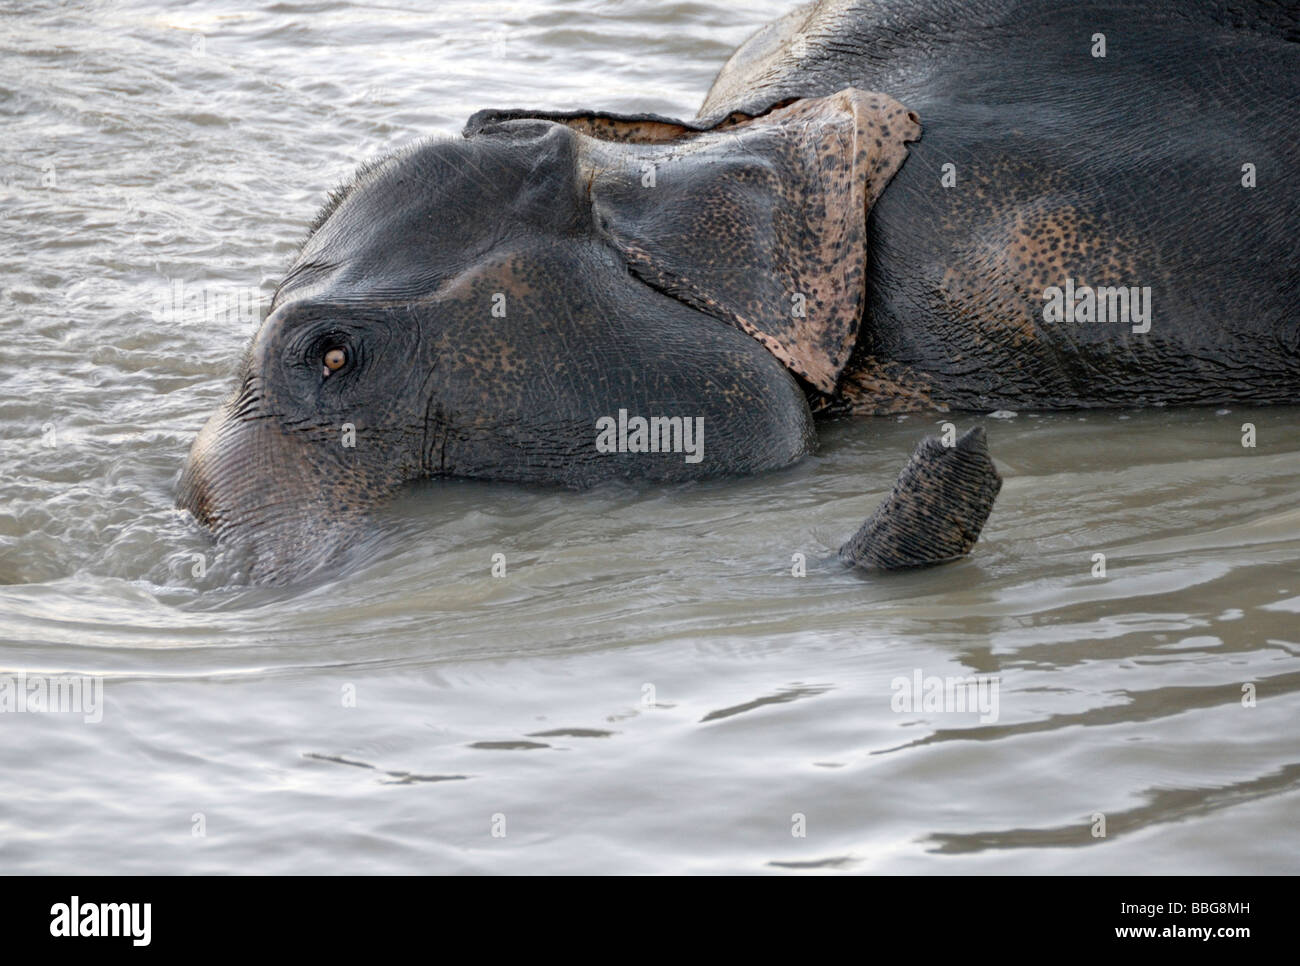 A working Indian Elephant (Elephas maximus indicus) enjoys a bath in a river after a hard days work Stock Photo